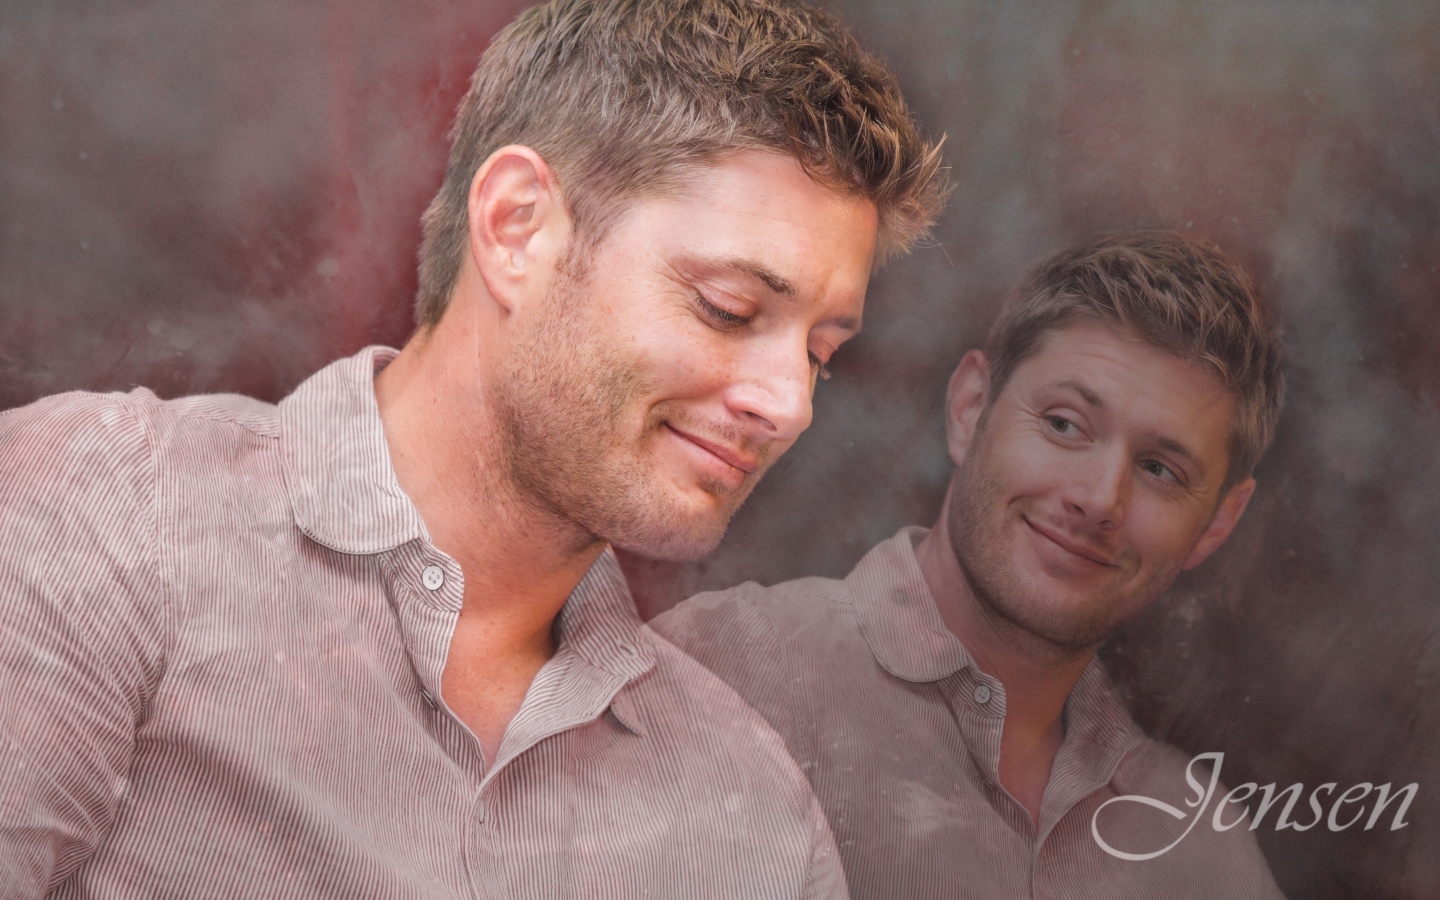 Jensen Ackles Cute Smile for 1440 x 900 widescreen resolution